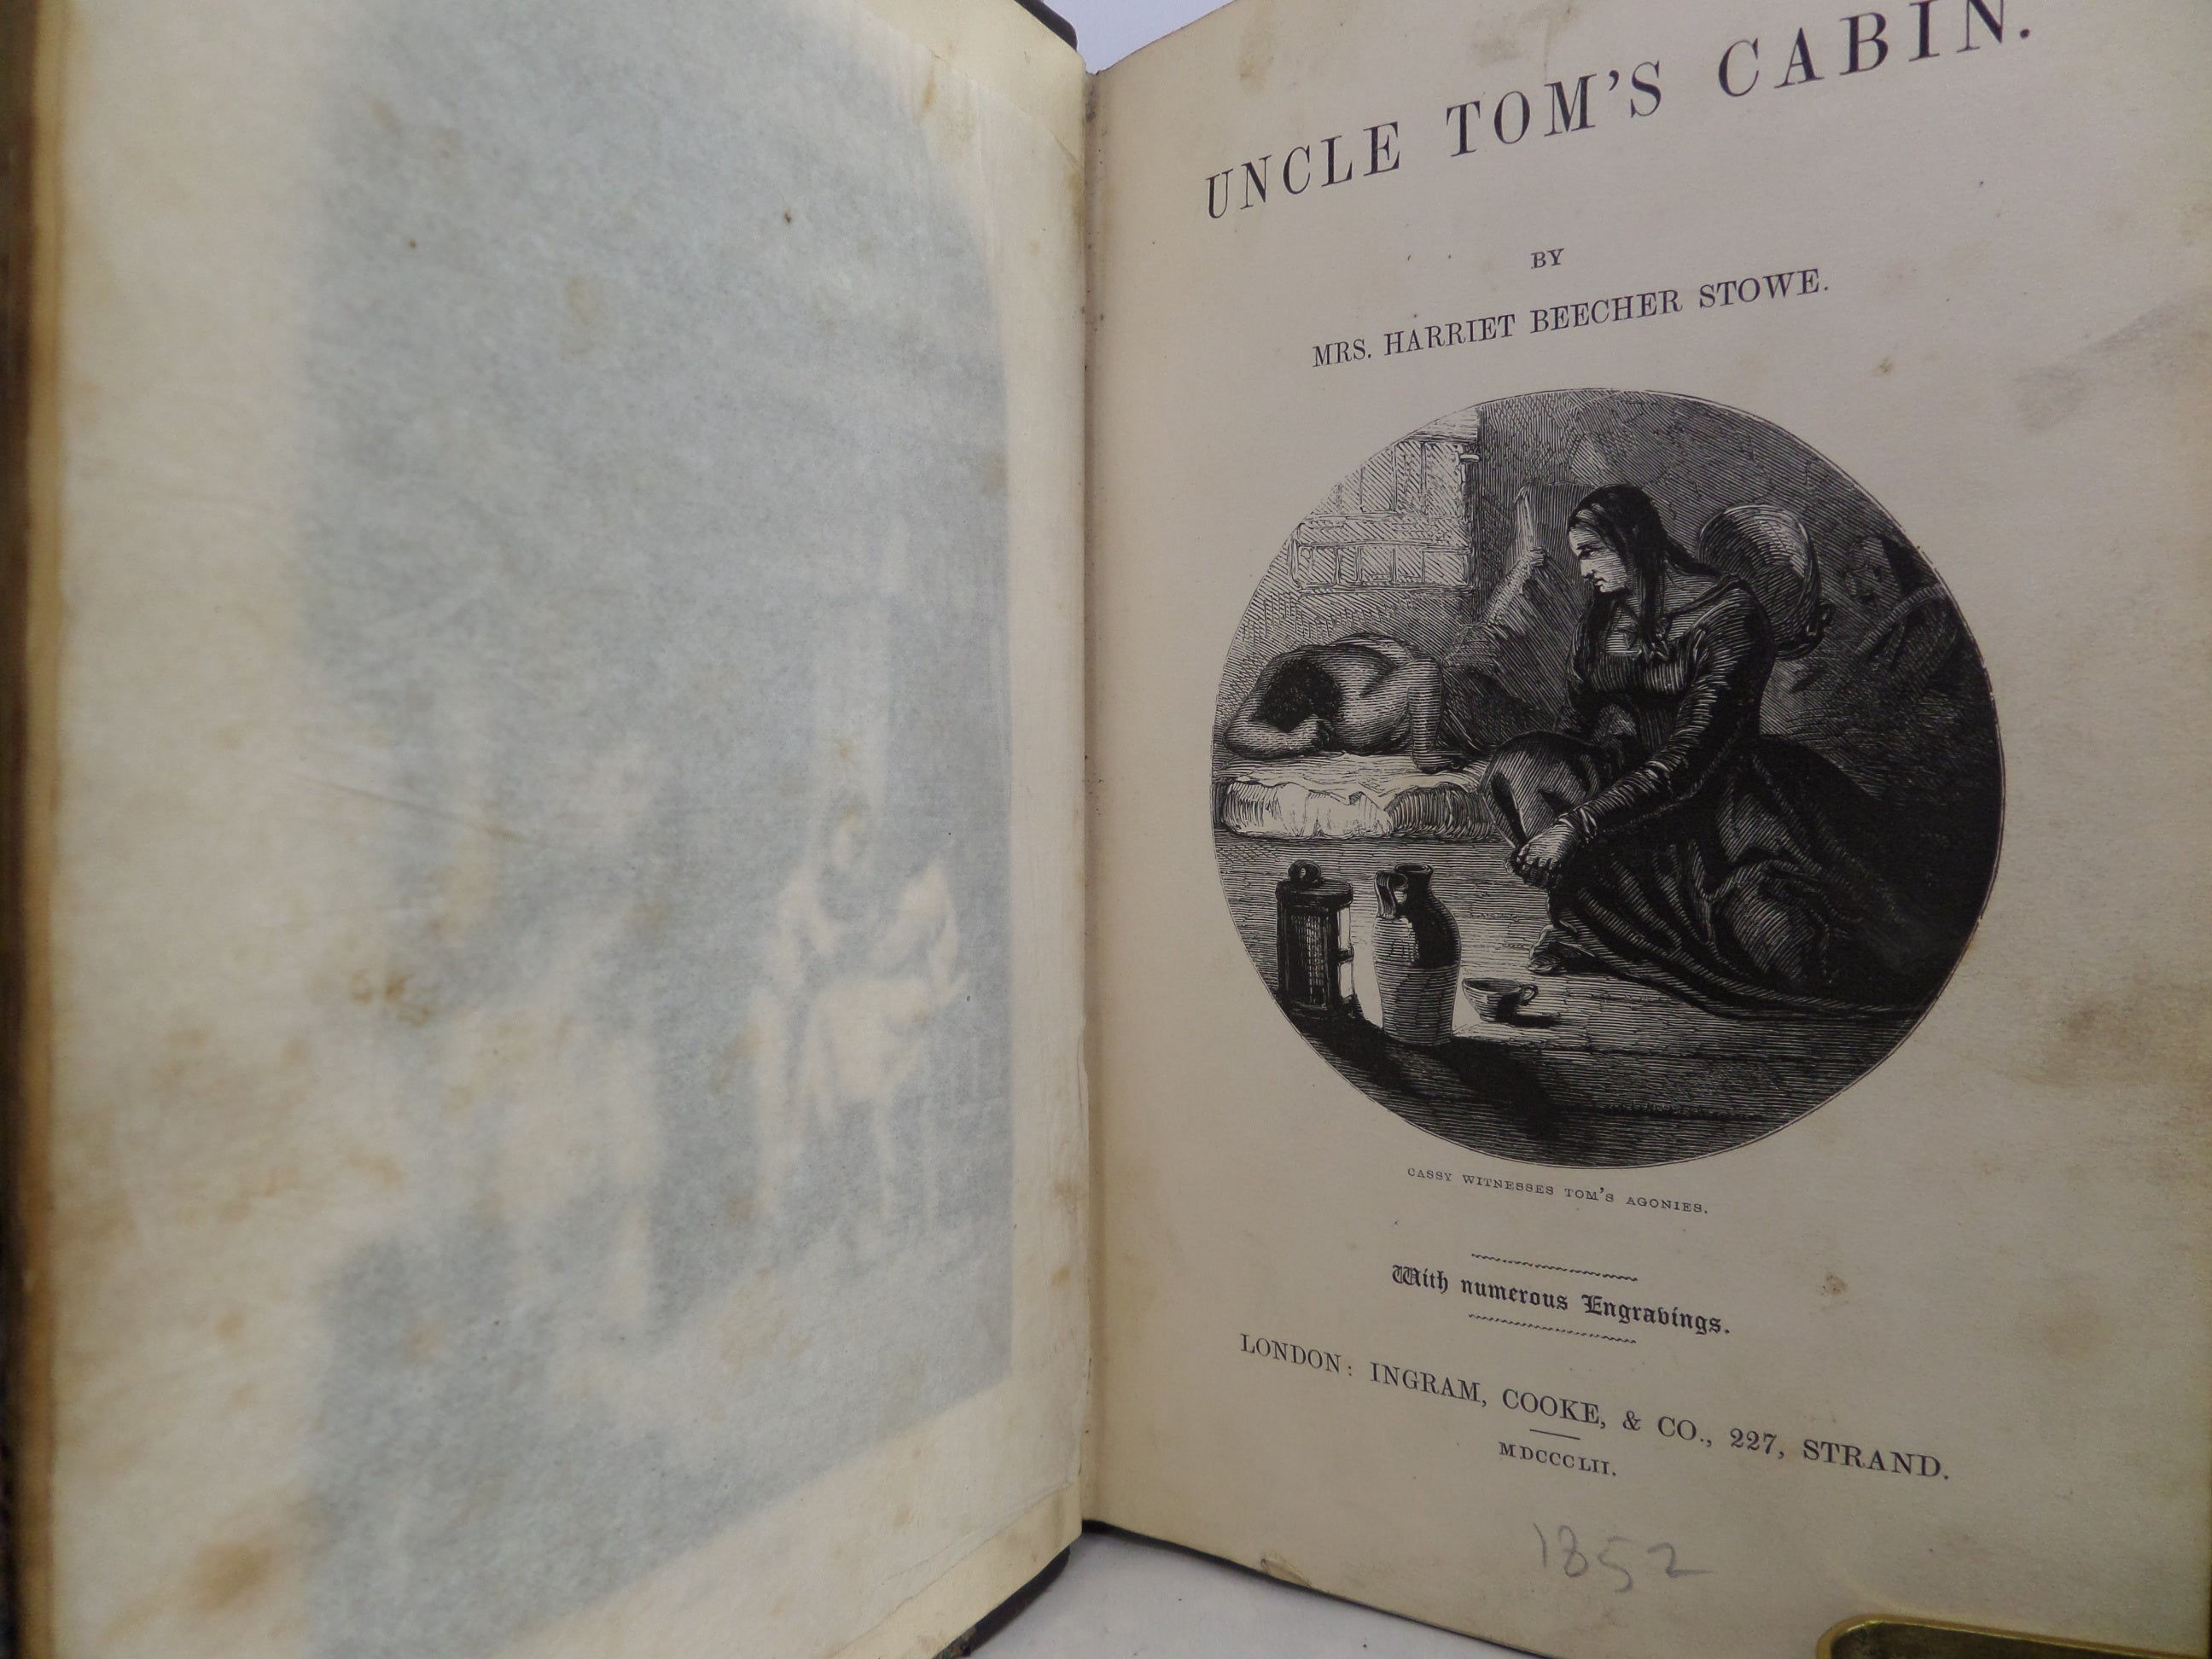 UNCLE TOM'S CABIN BY HARRIET BEECHER STOWE 1852 SECOND EDITION, LEATHER BINDING